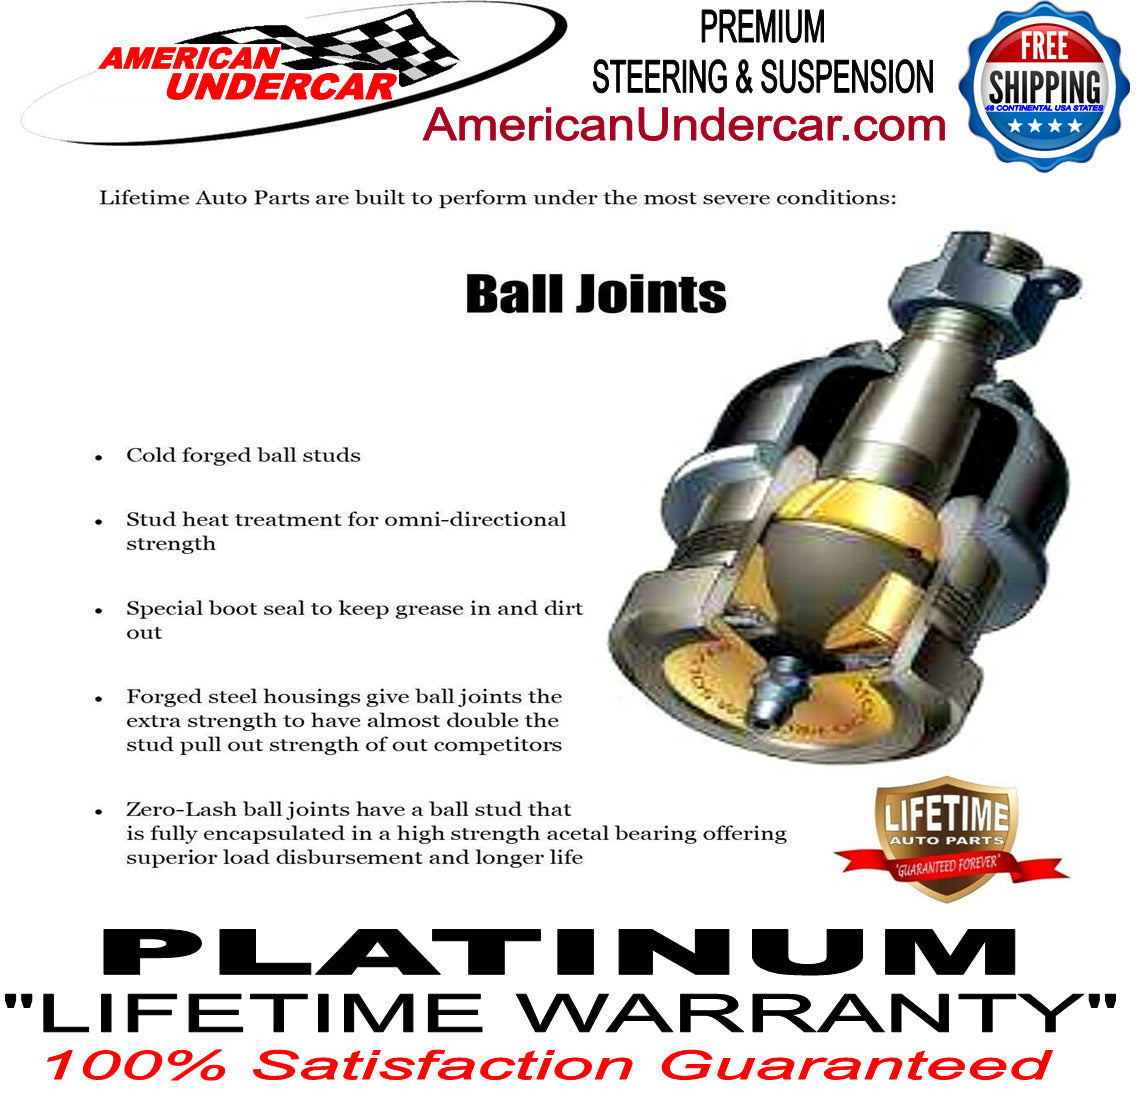 Lifetime Hub Bearing Assembly for 2005-2010 Ford F450 Super Duty 4x4 DRW